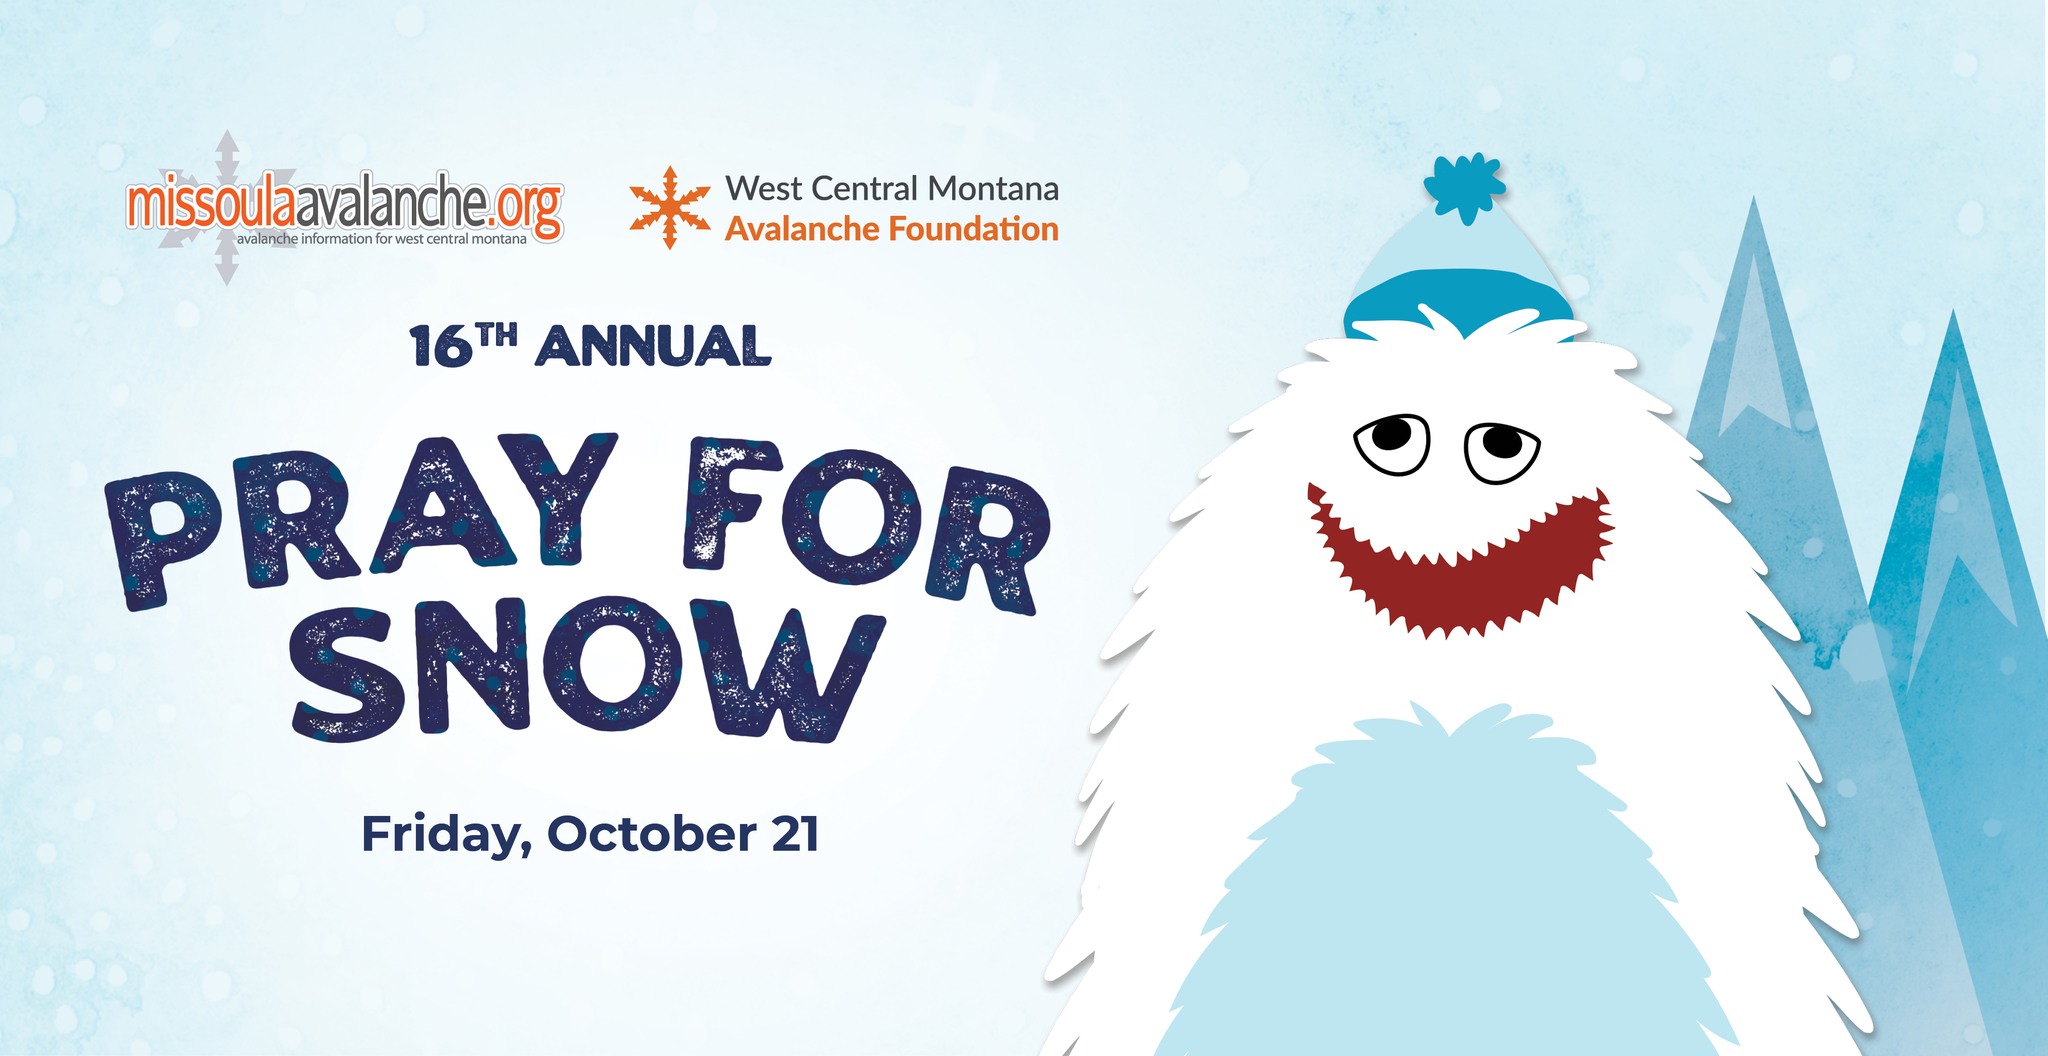 16th Annual Pray for Snow fundraiser for Missoula Avalanche at Caras Park in Downtown Missoula on Friday, October 21